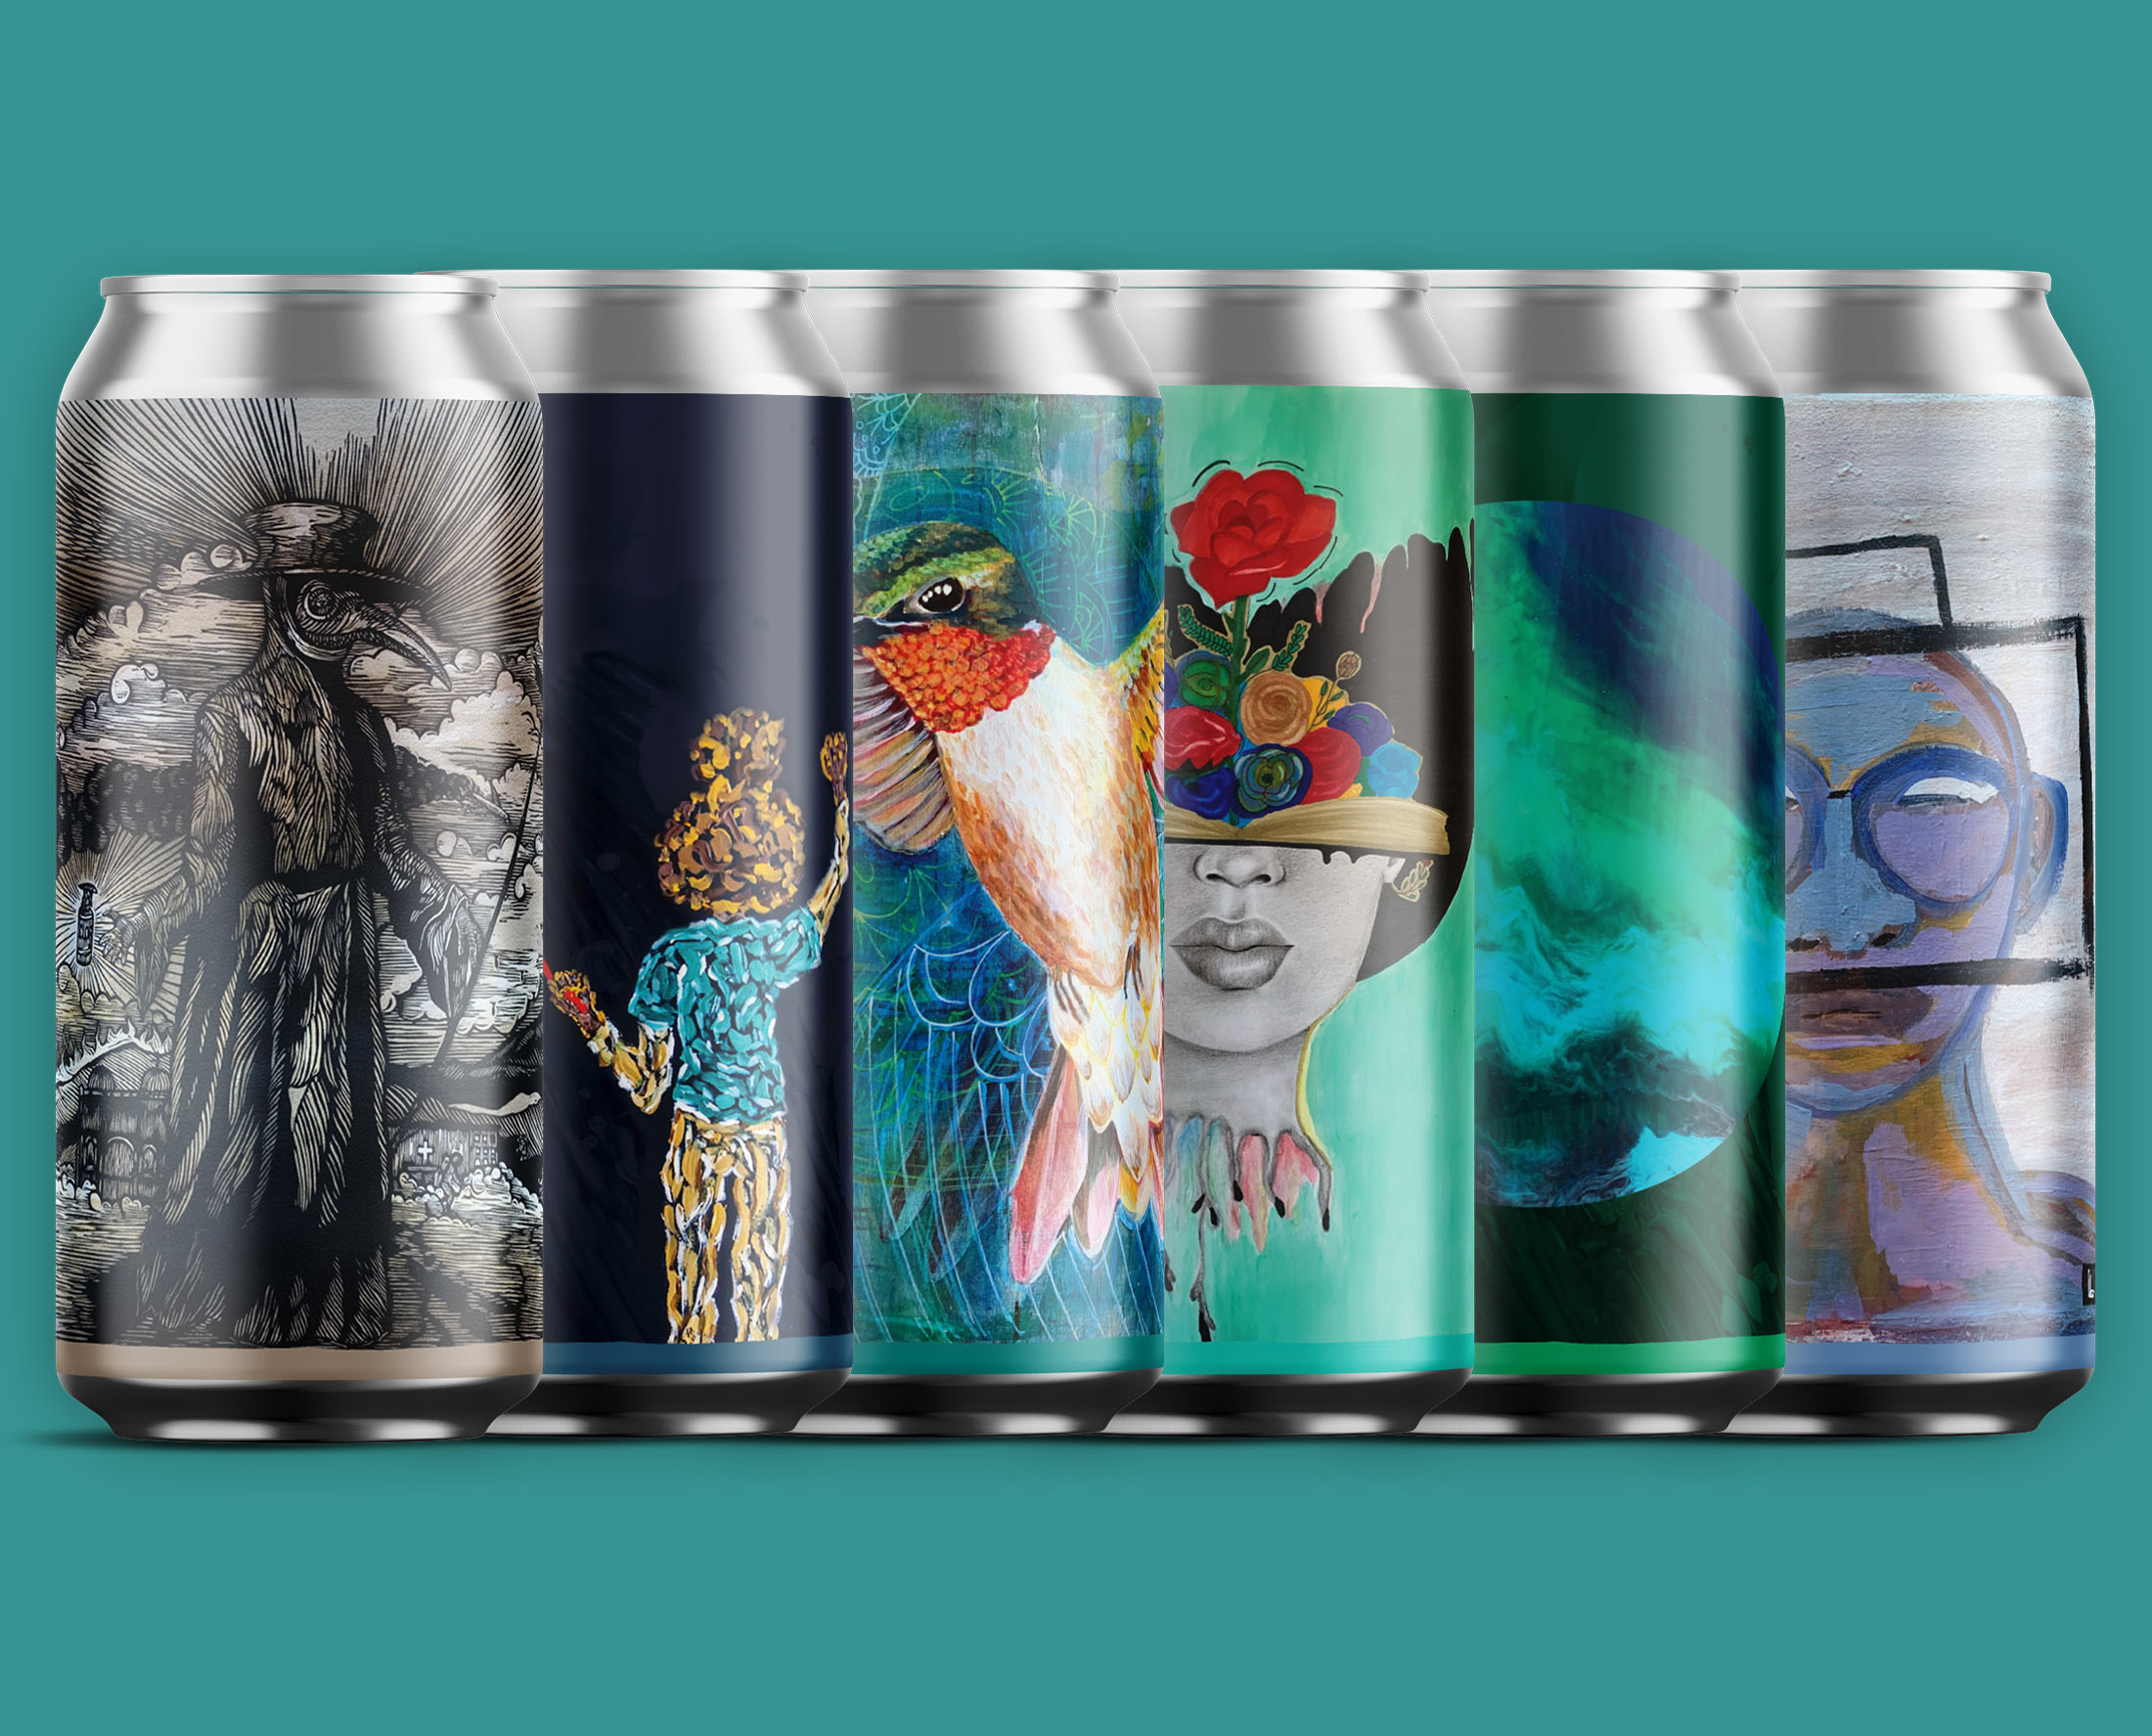 Digital rendering of paint the Globe Foundation beer can, 6 cans featuring art donated by local artist.